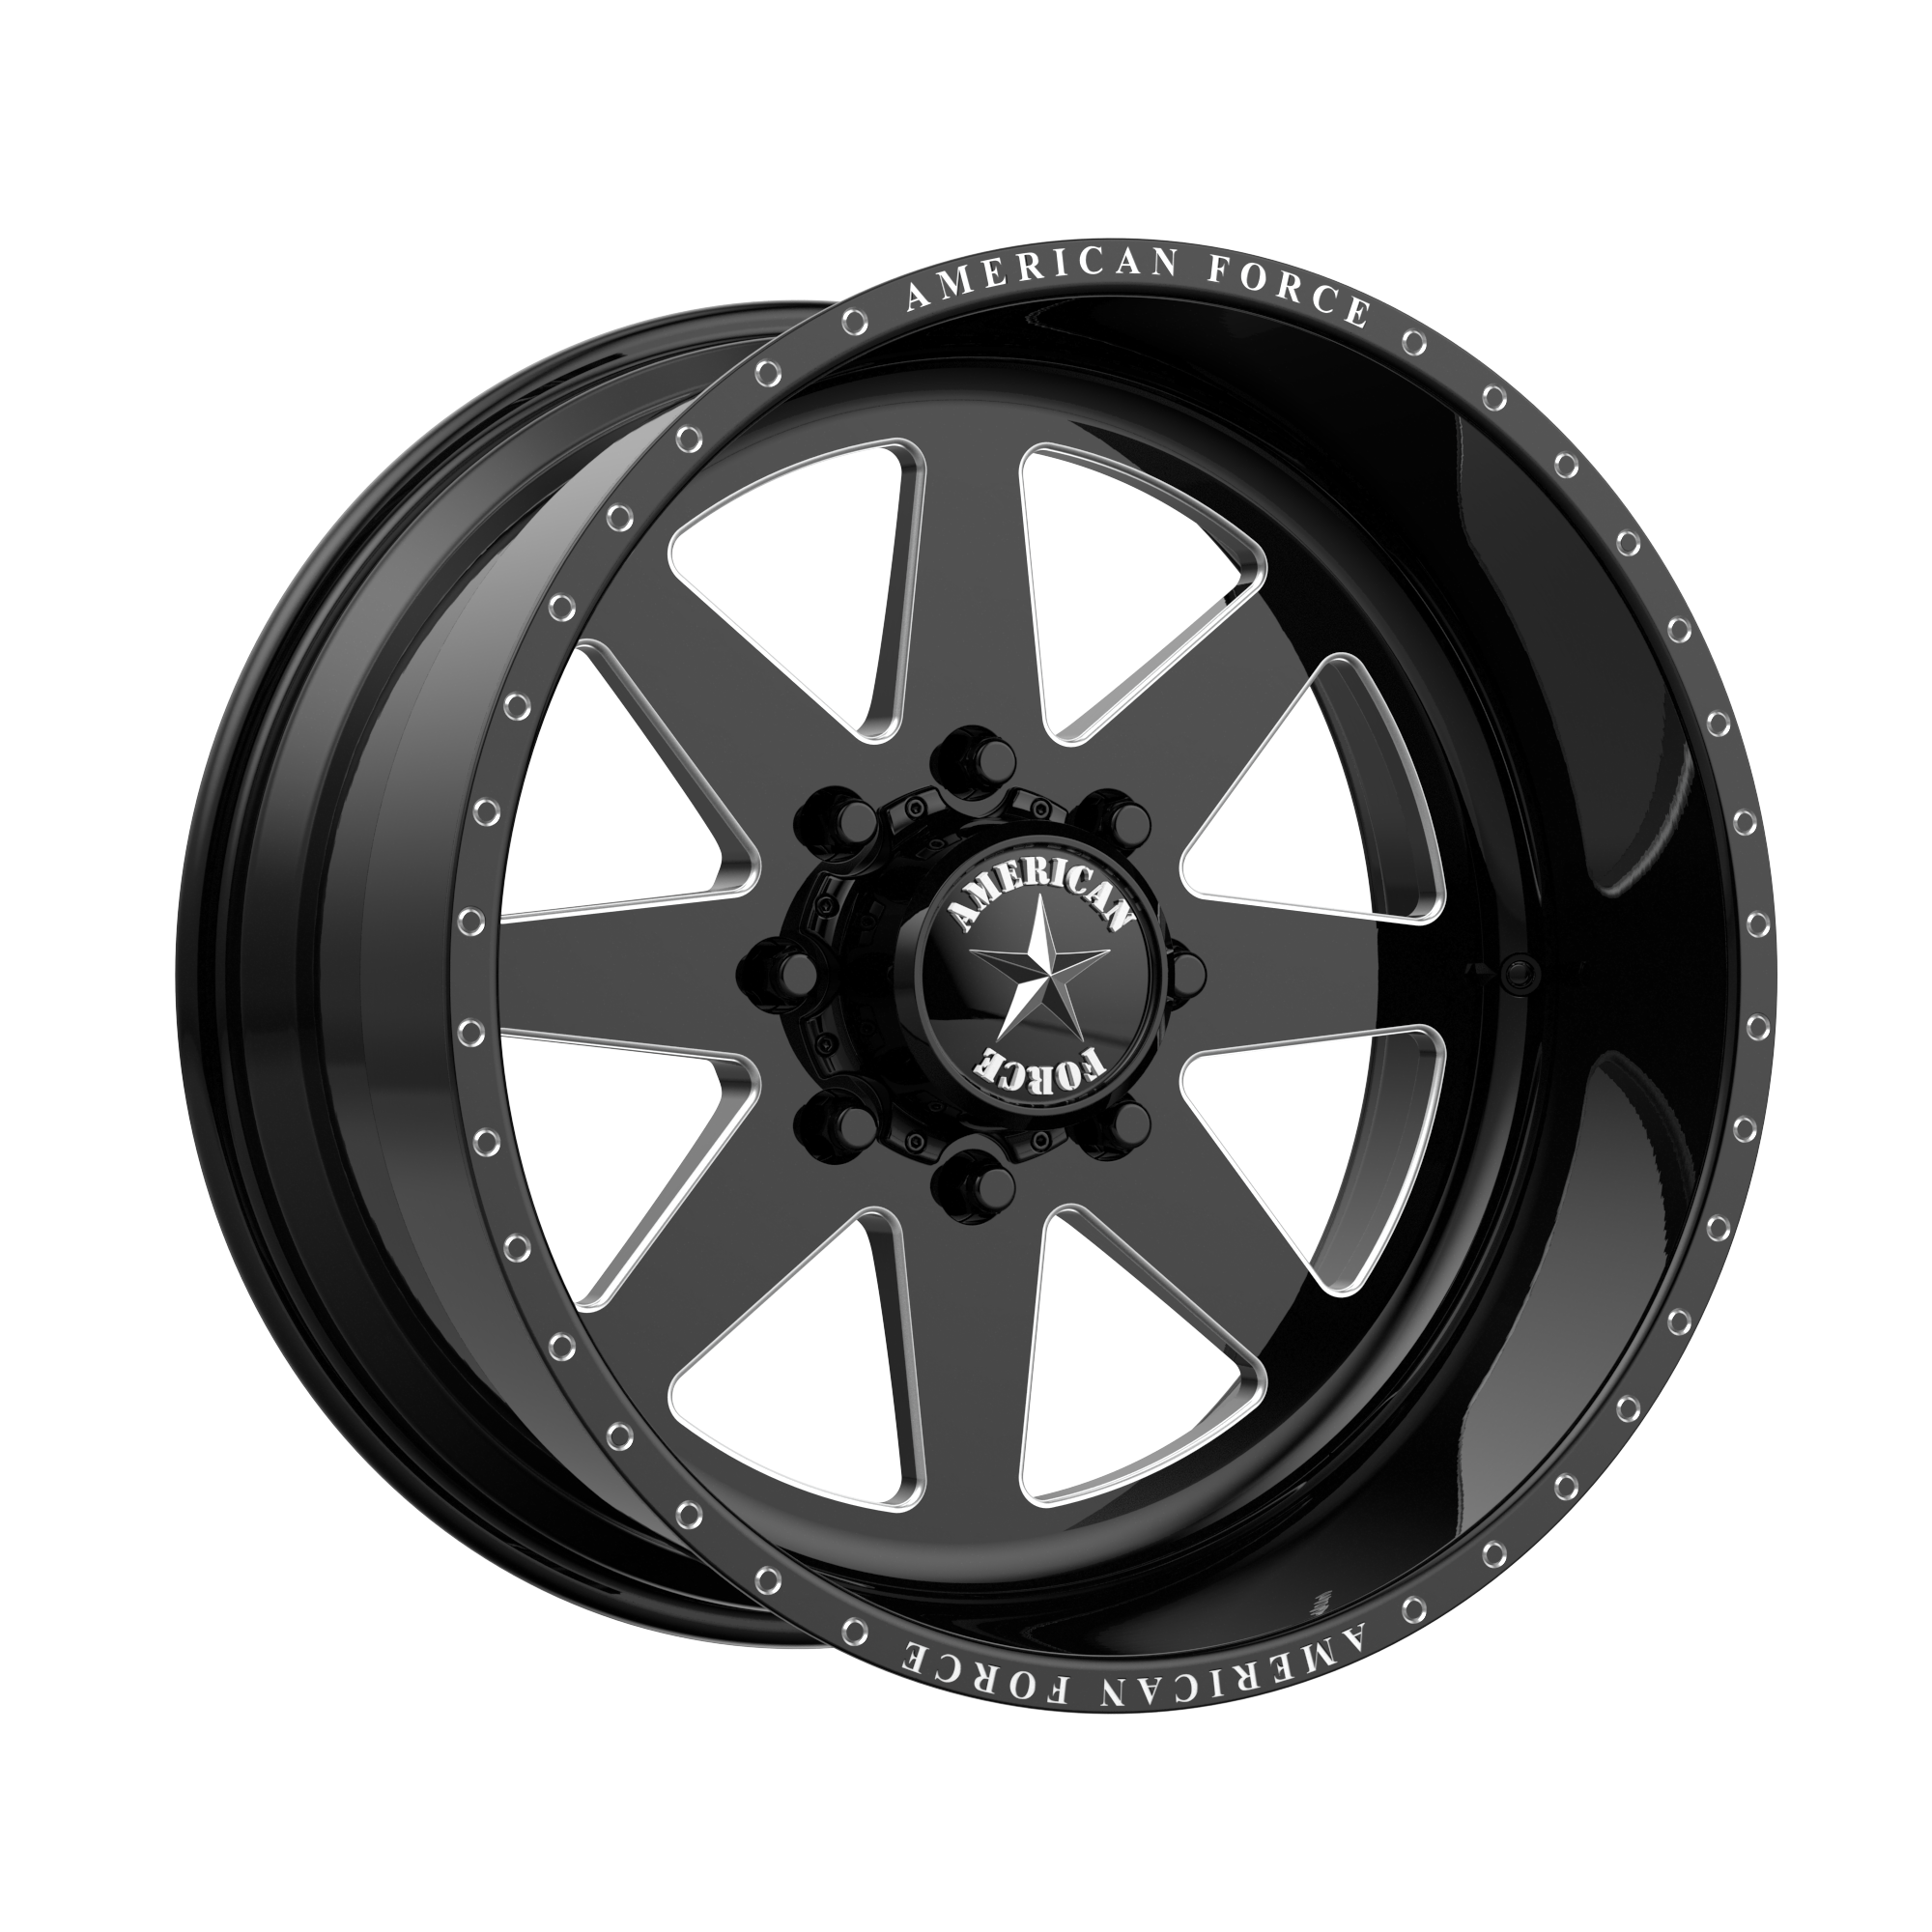 INDEPENDENCE SS 26x12 6x135.00 GLOSS BLACK MACHINED (-40 mm) - Tires and Engine Performance